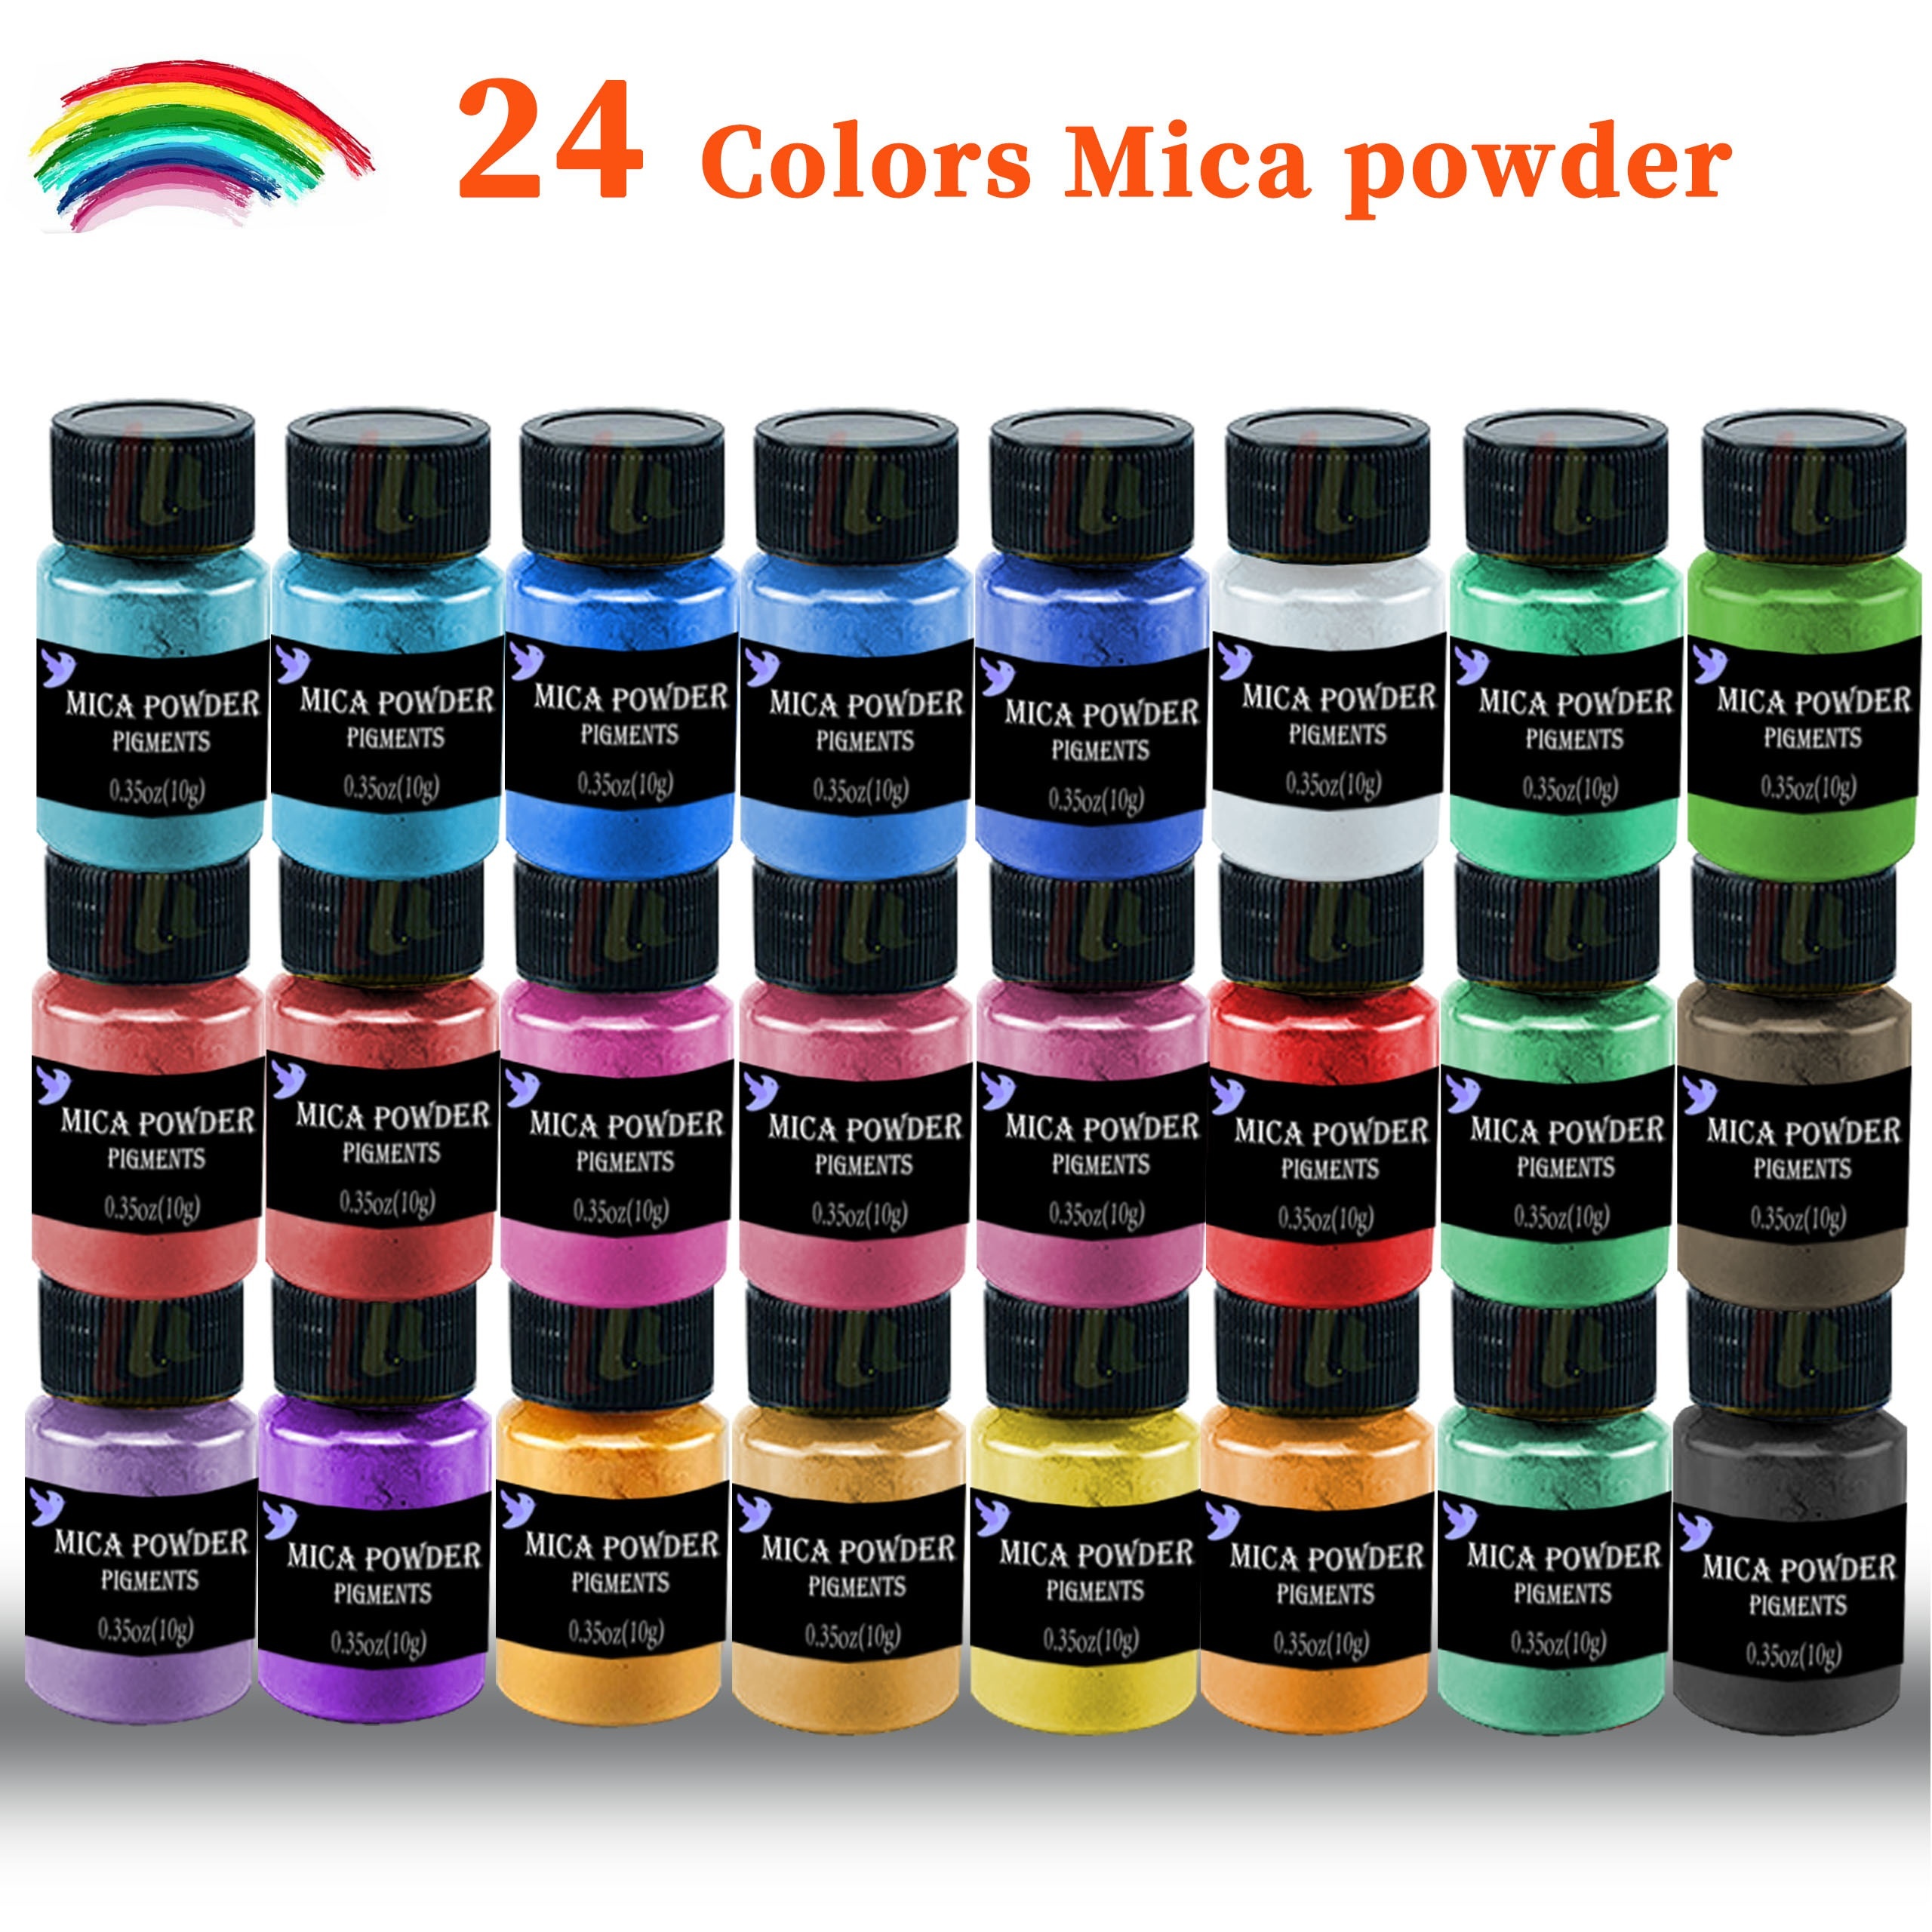 Fantastory Mica Powder for Epoxy Resin, 32 Colors(0.35oz/10g) Cosmetic  Grade Pigment Powder, Incl. 6 Jars Glitter Mica Powders for Candle Making,  Car